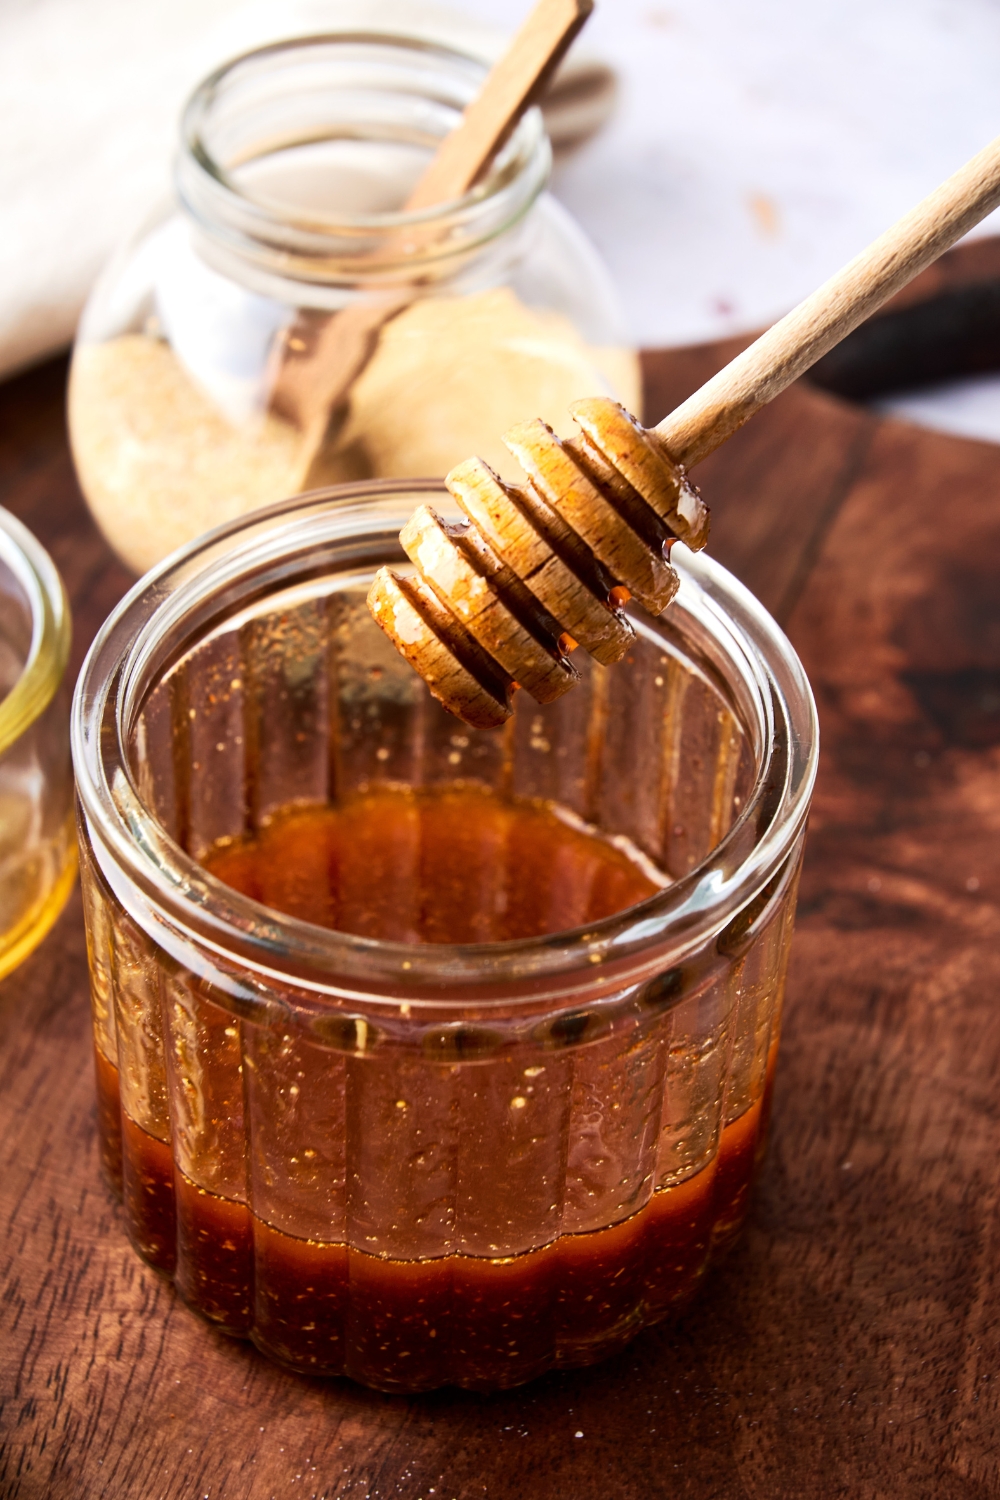 Someone holds a honey dipper of a glass jar full of hot honey on a wooden cutting board.